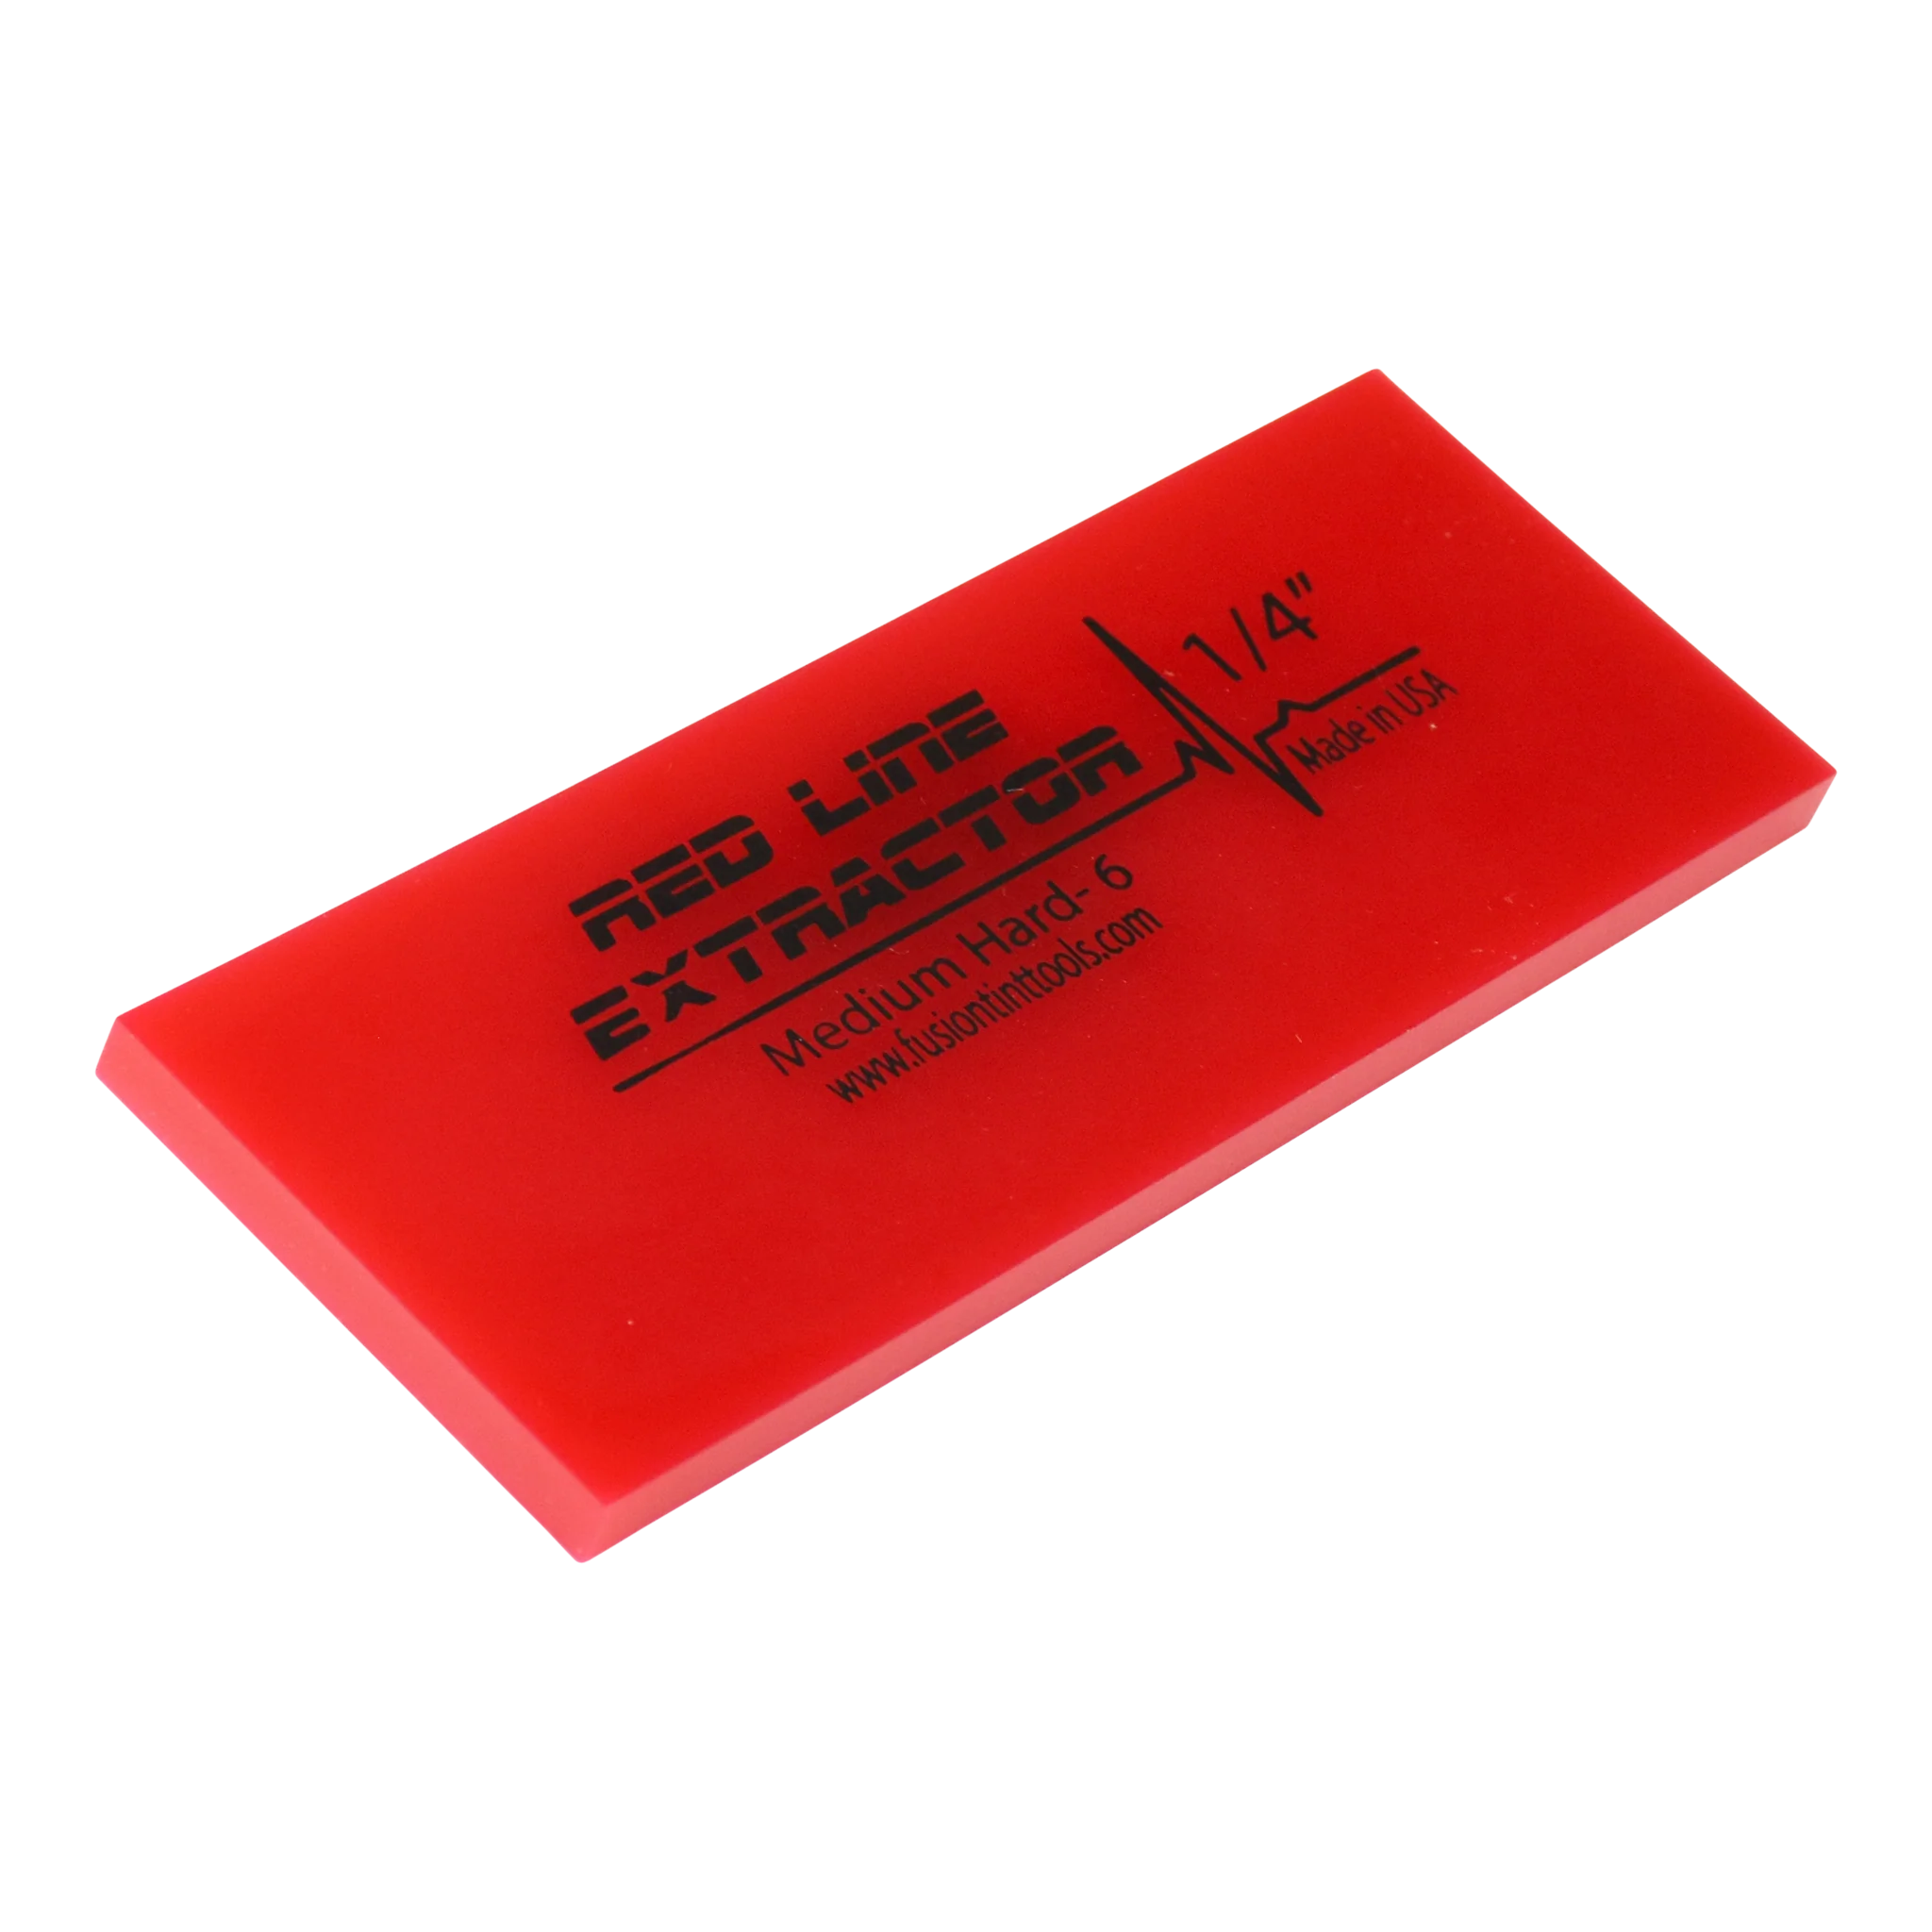 5" Red Line Extractor 1/4" No Bevel Squeegee Blade